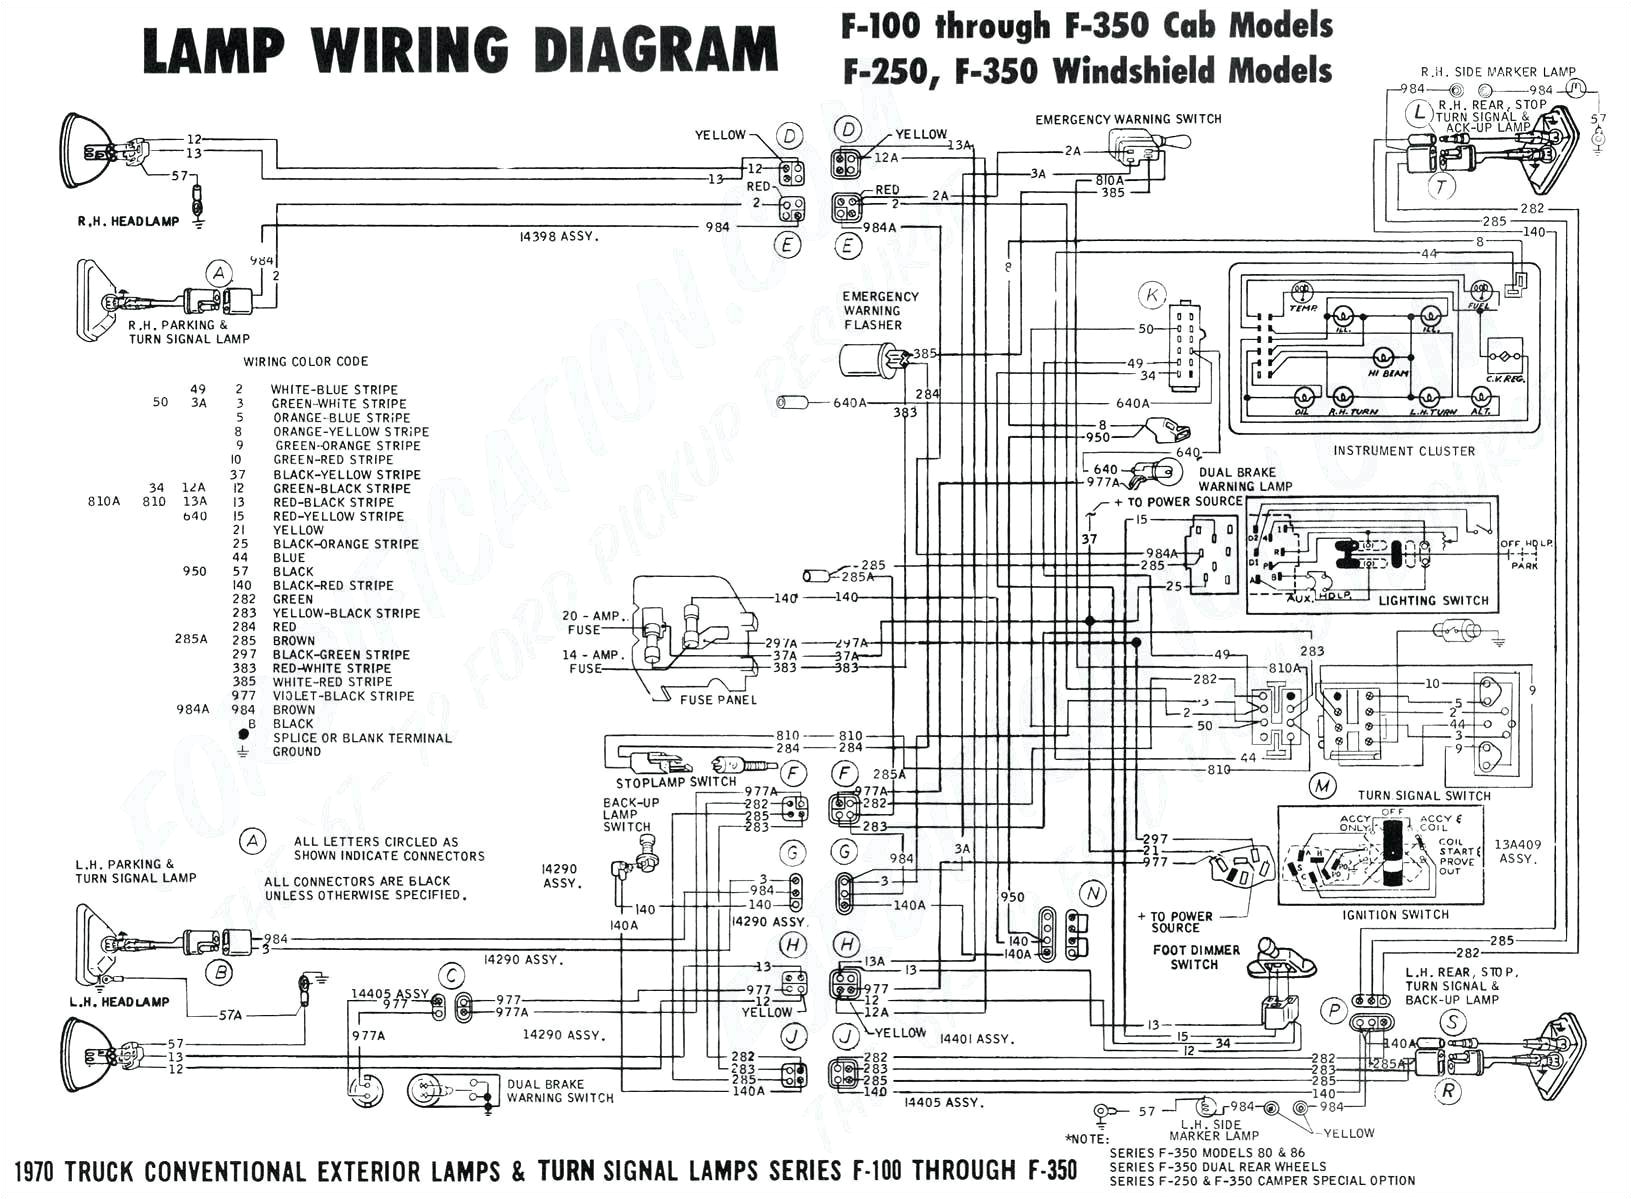 c2 wiring schematic wiring diagram wiring diagrams c2 ab myrons mopeds